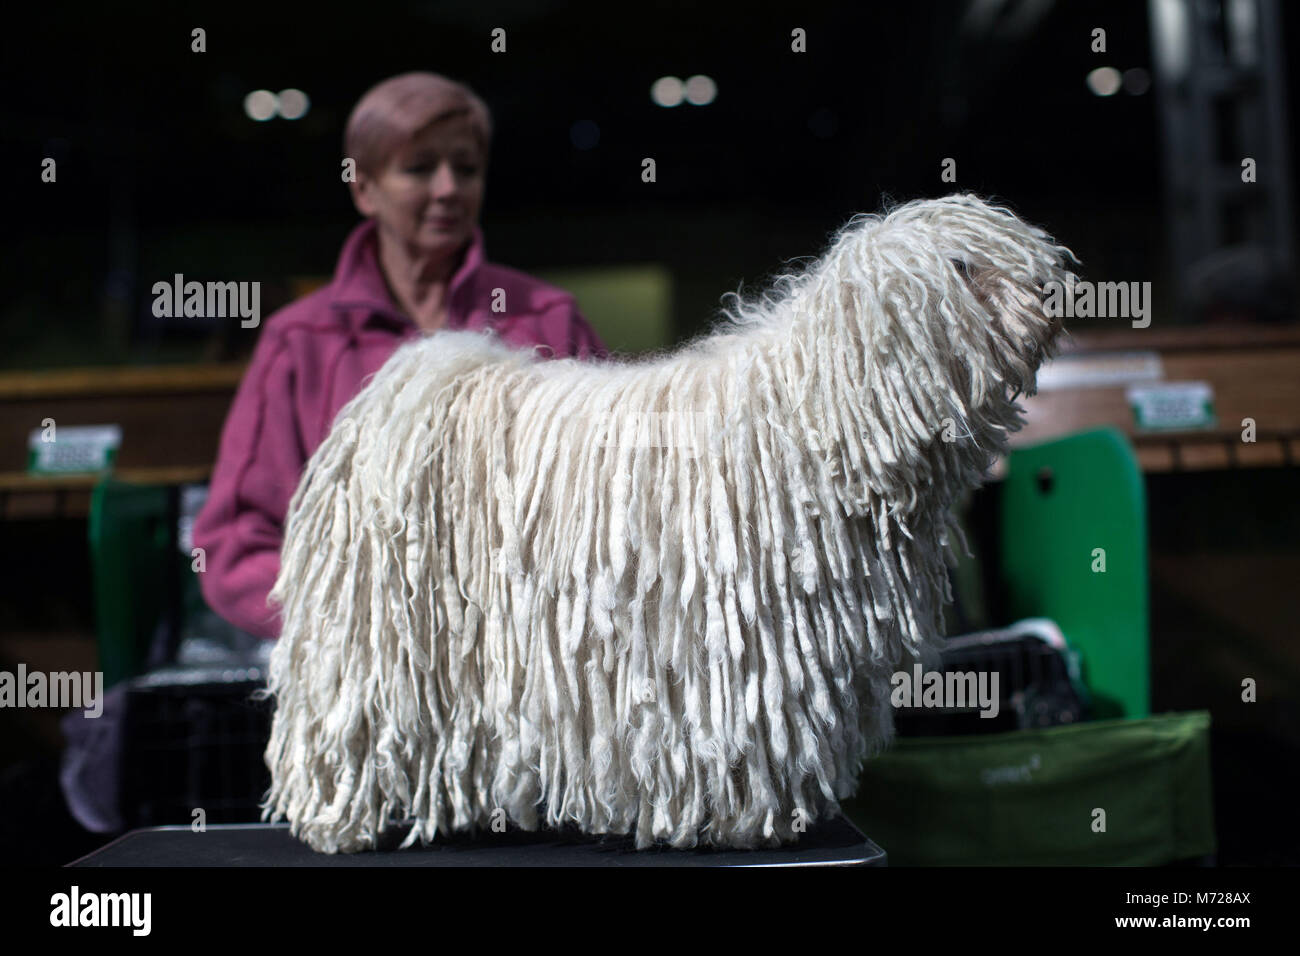 A Komondor dog, also known as an Hungarian sheepdog, during the first day of Crufts 2018 at the NEC in Birmingham. Stock Photo